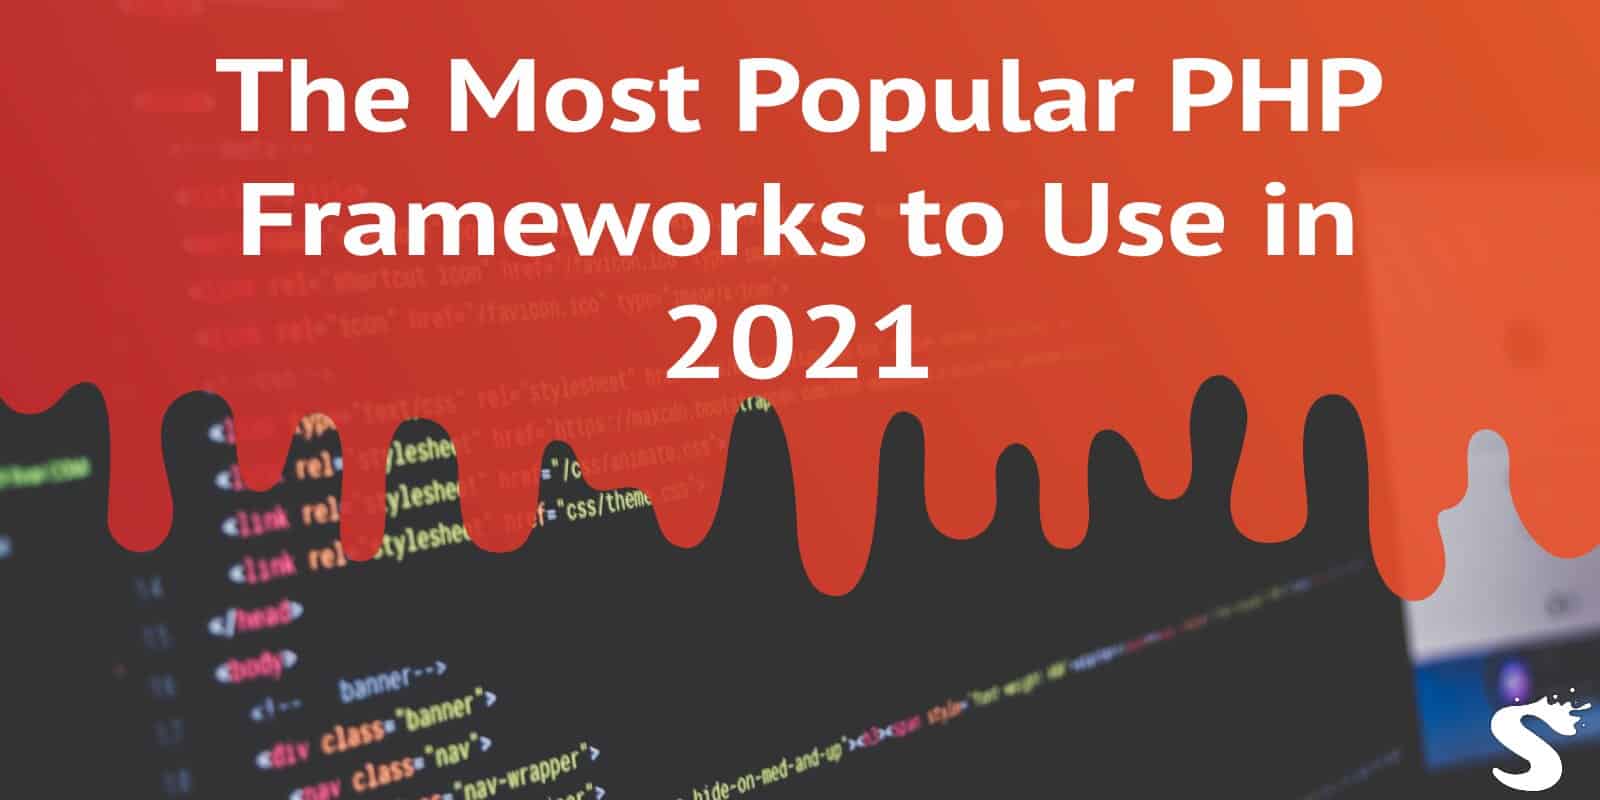 The Most Popular PHP Frameworks to Use in 2021